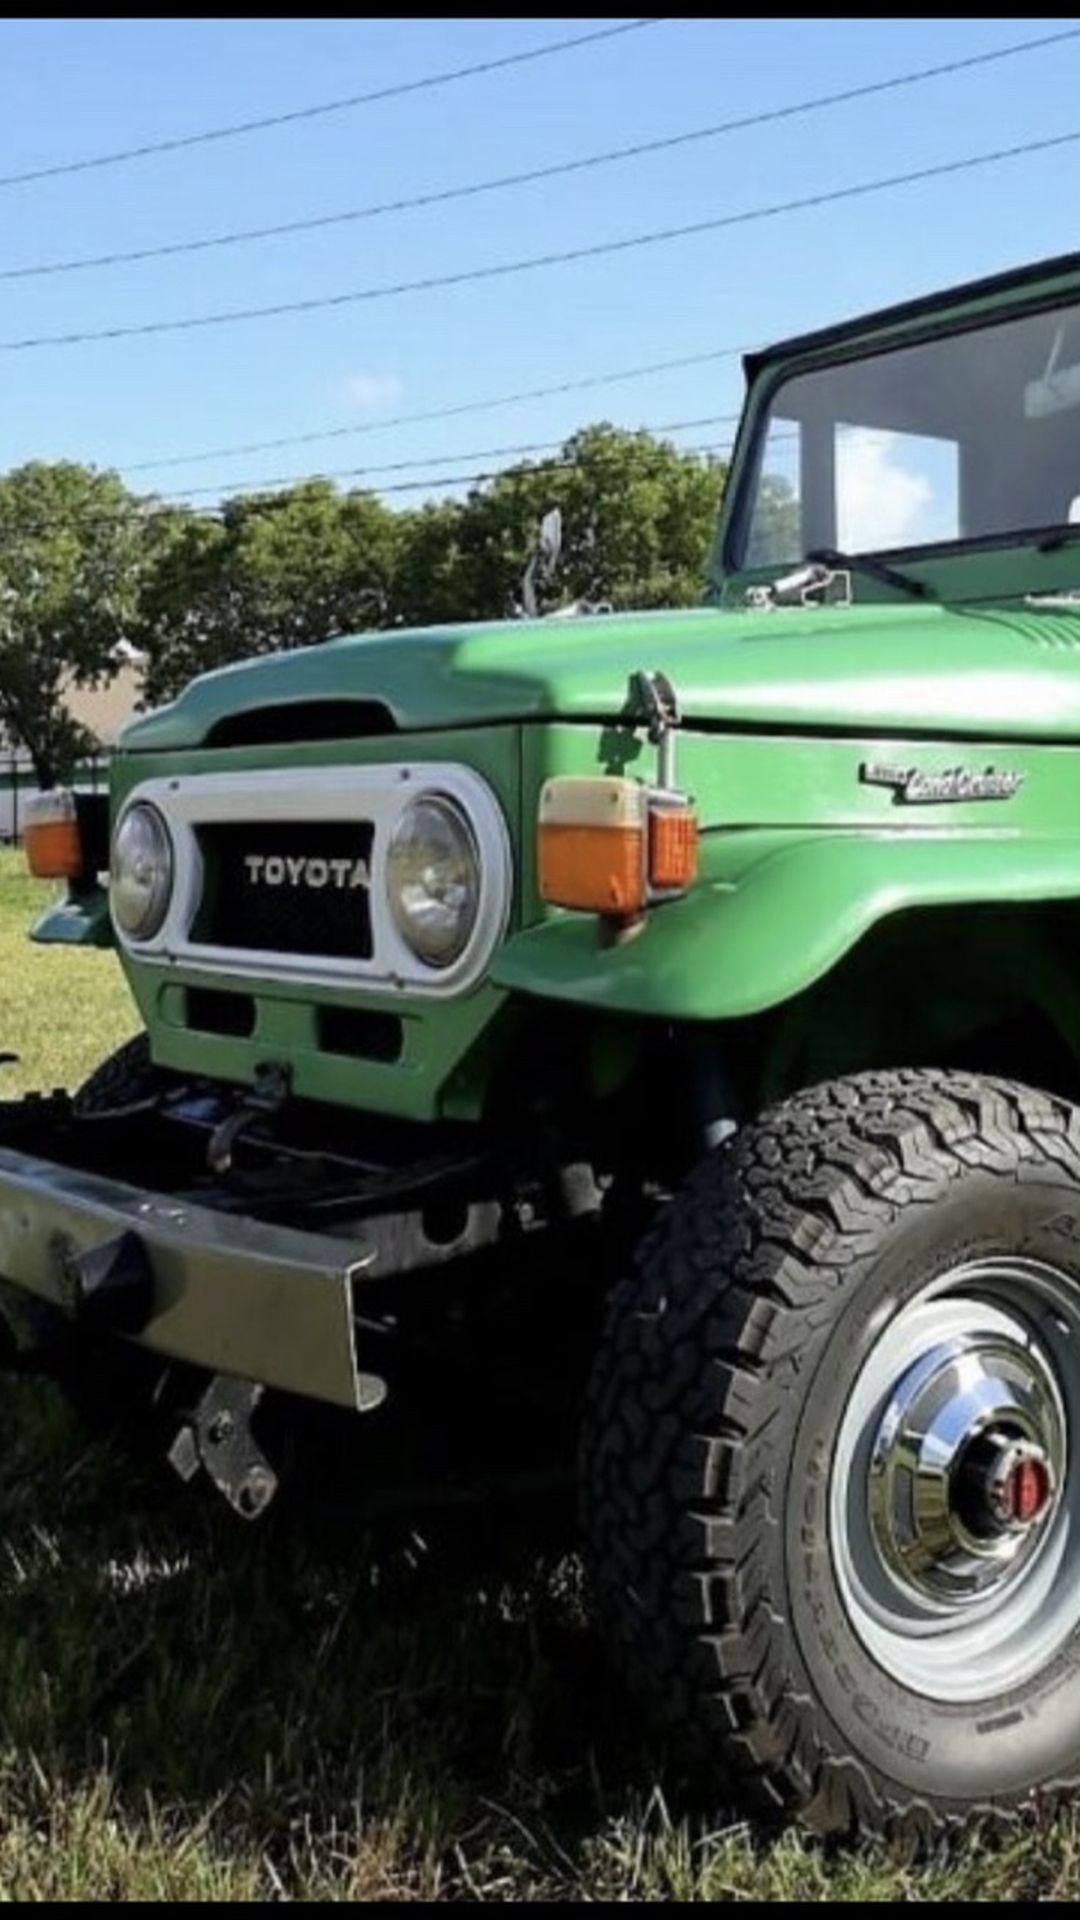 1975 Toyota Fj40. Imported. Barn Find. Original. 4spd and Power Steering.